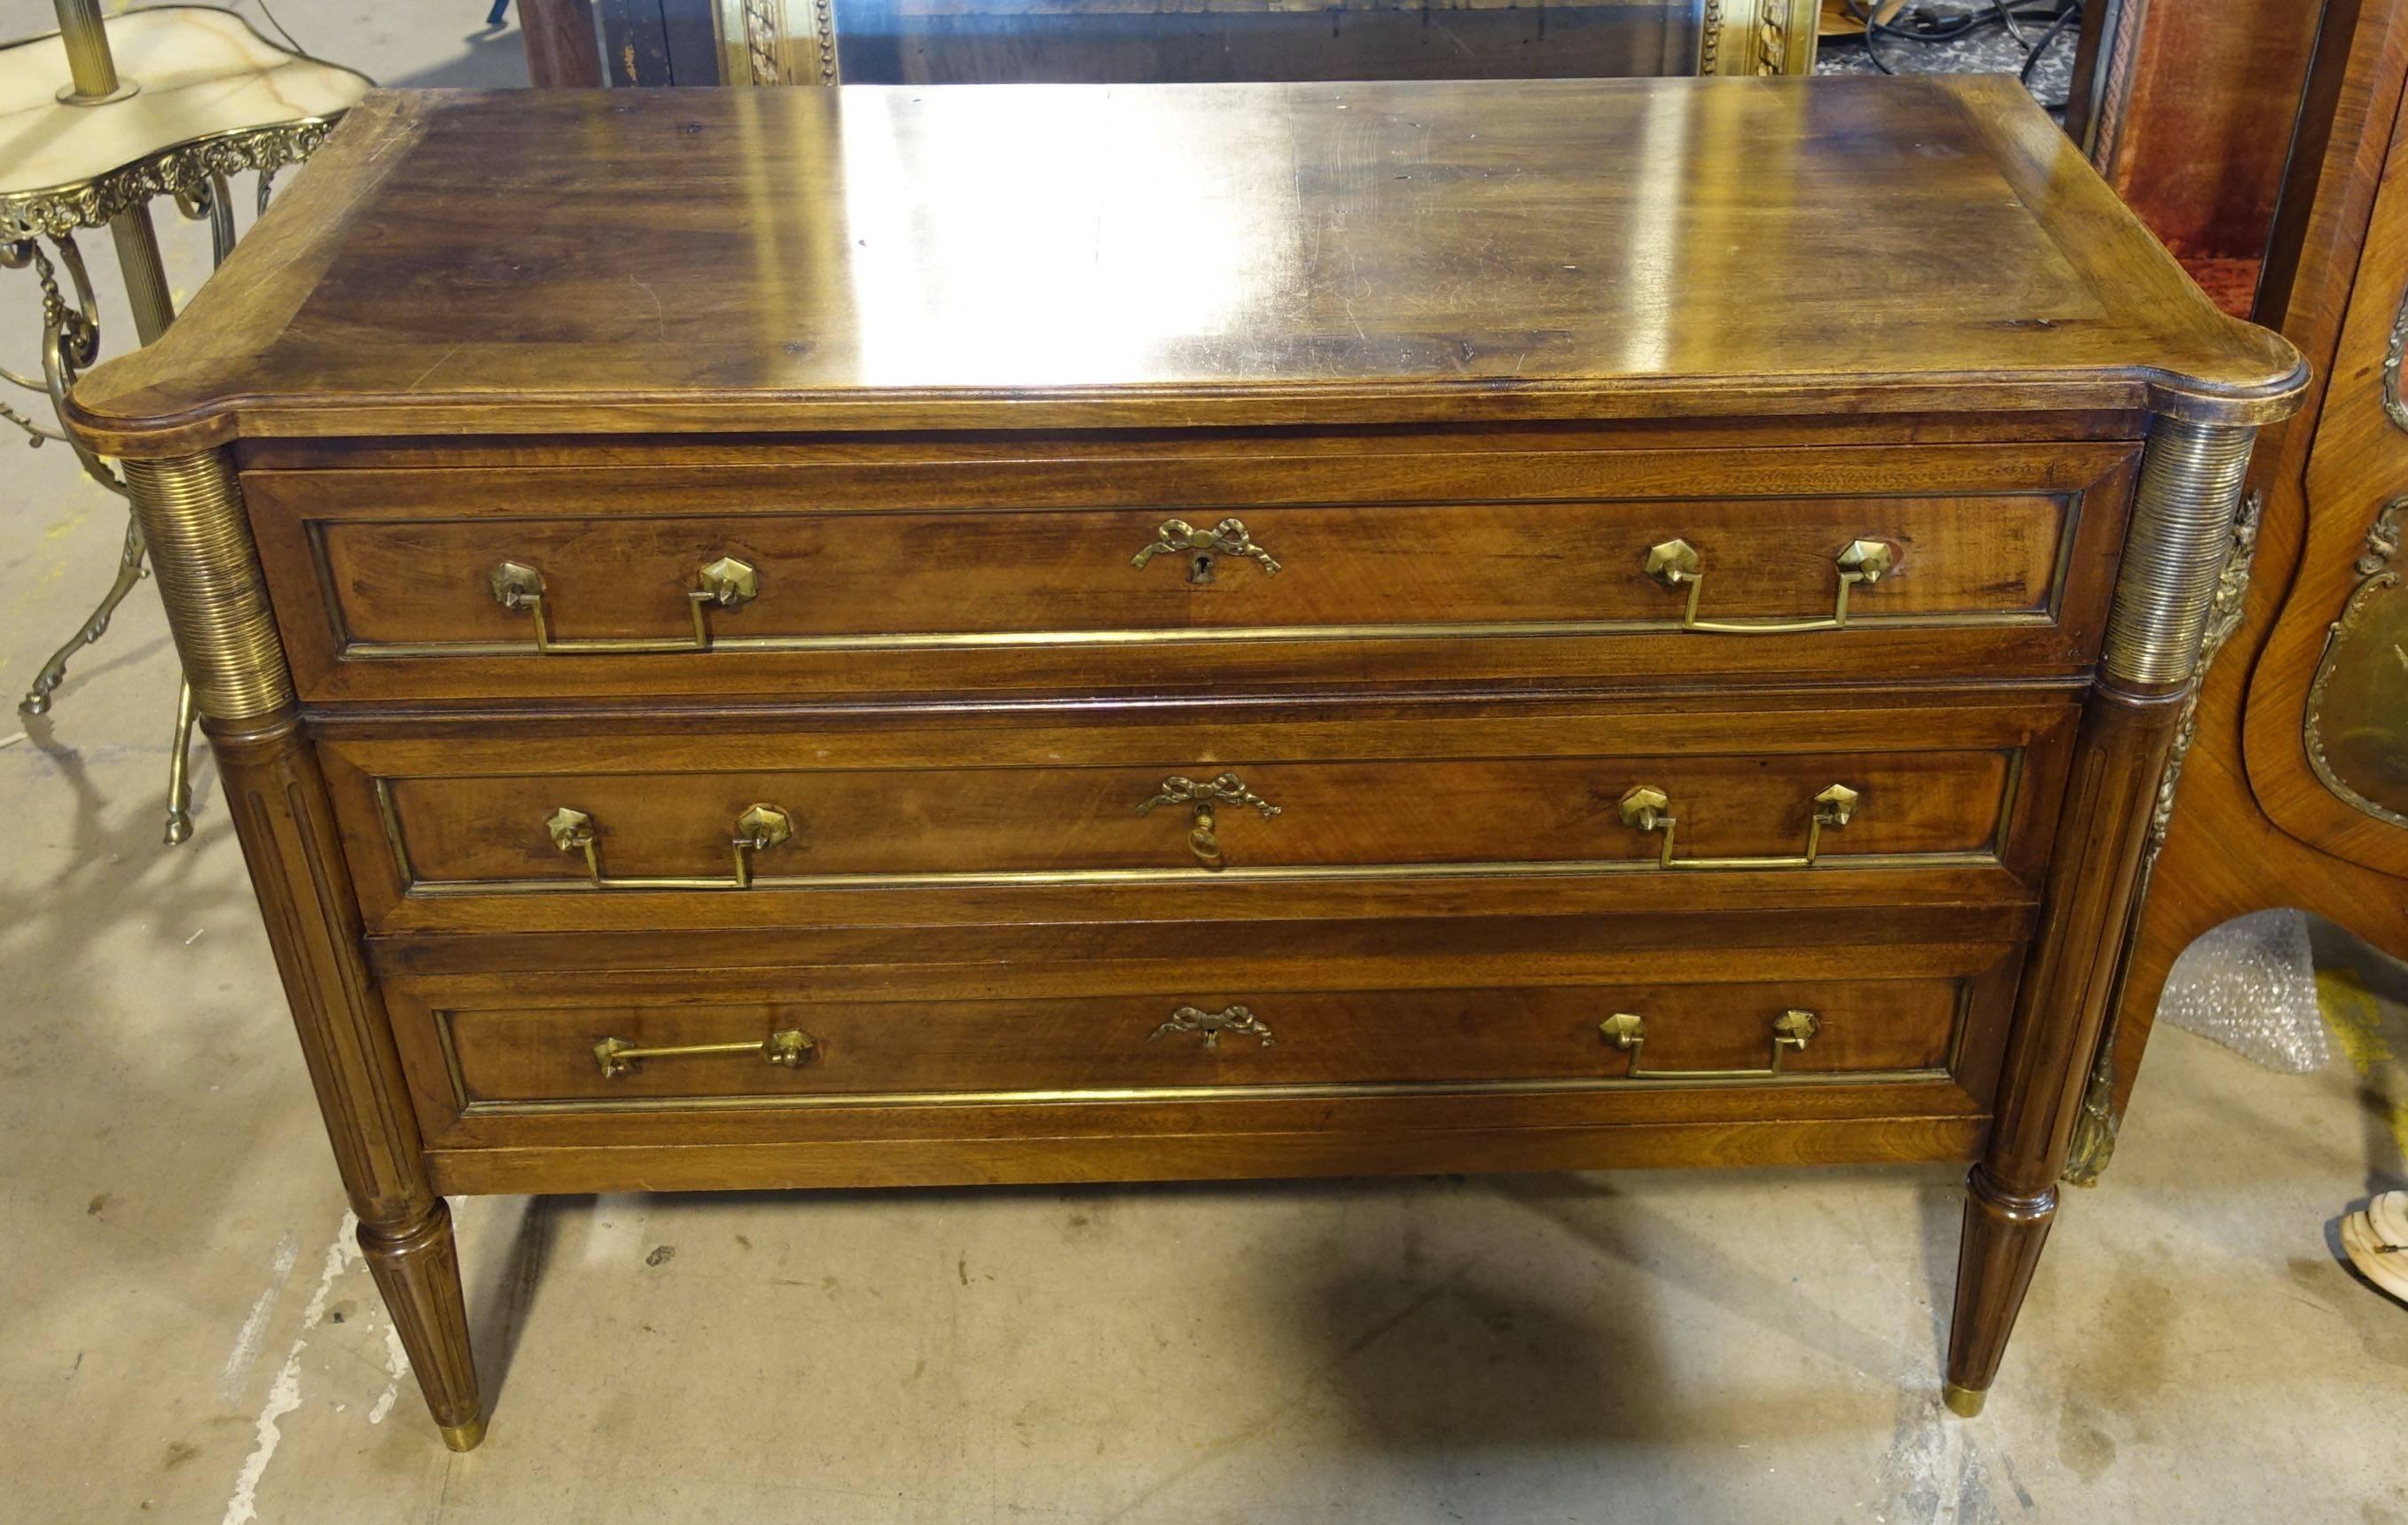 French three-drawer commode, circa 19th century.
Brass drawer pulls. Unusual brass trim accent on the upper portion of the legs.
